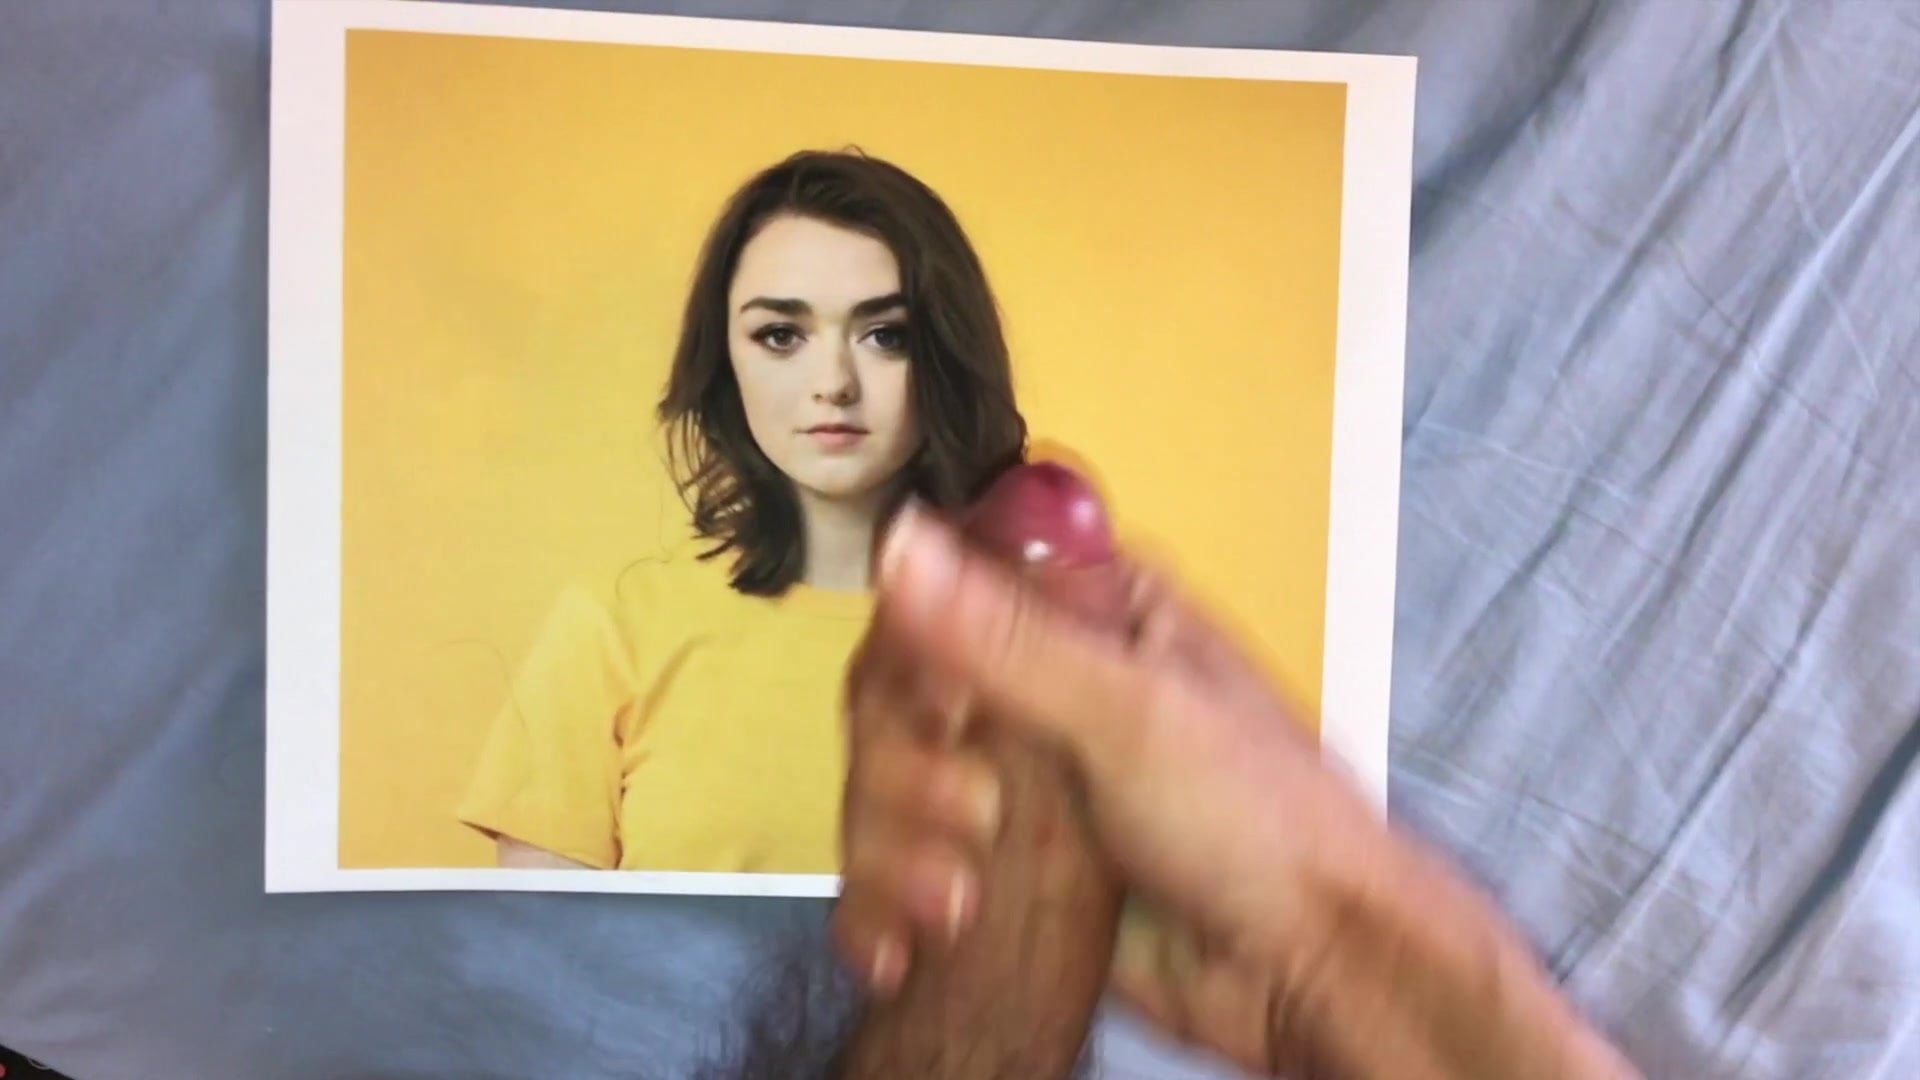 Maisie Williams Cum Tribute 28, Free Gay Porn 20: xHamster xHamster.